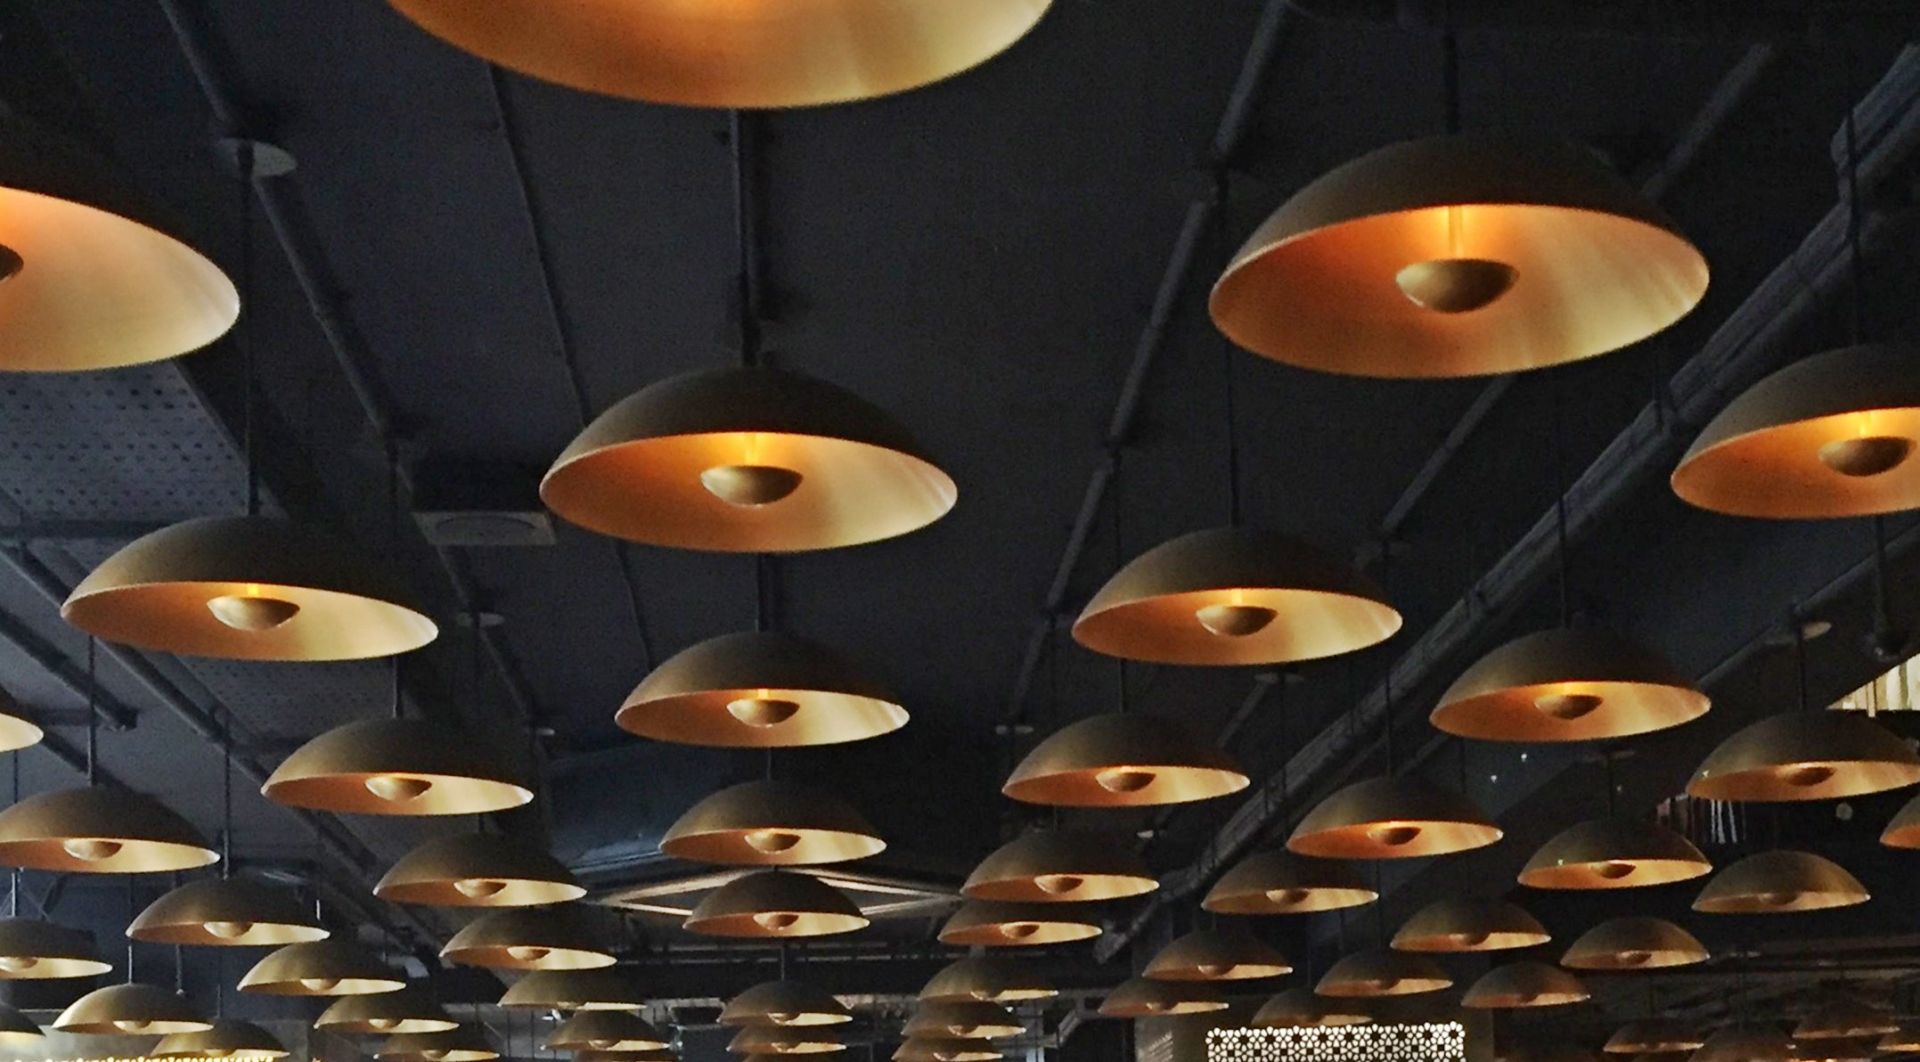 12 x Brass Effect Suspended Ceiling Light Pendant - High Quality Light Fittings With Metal - Image 5 of 7